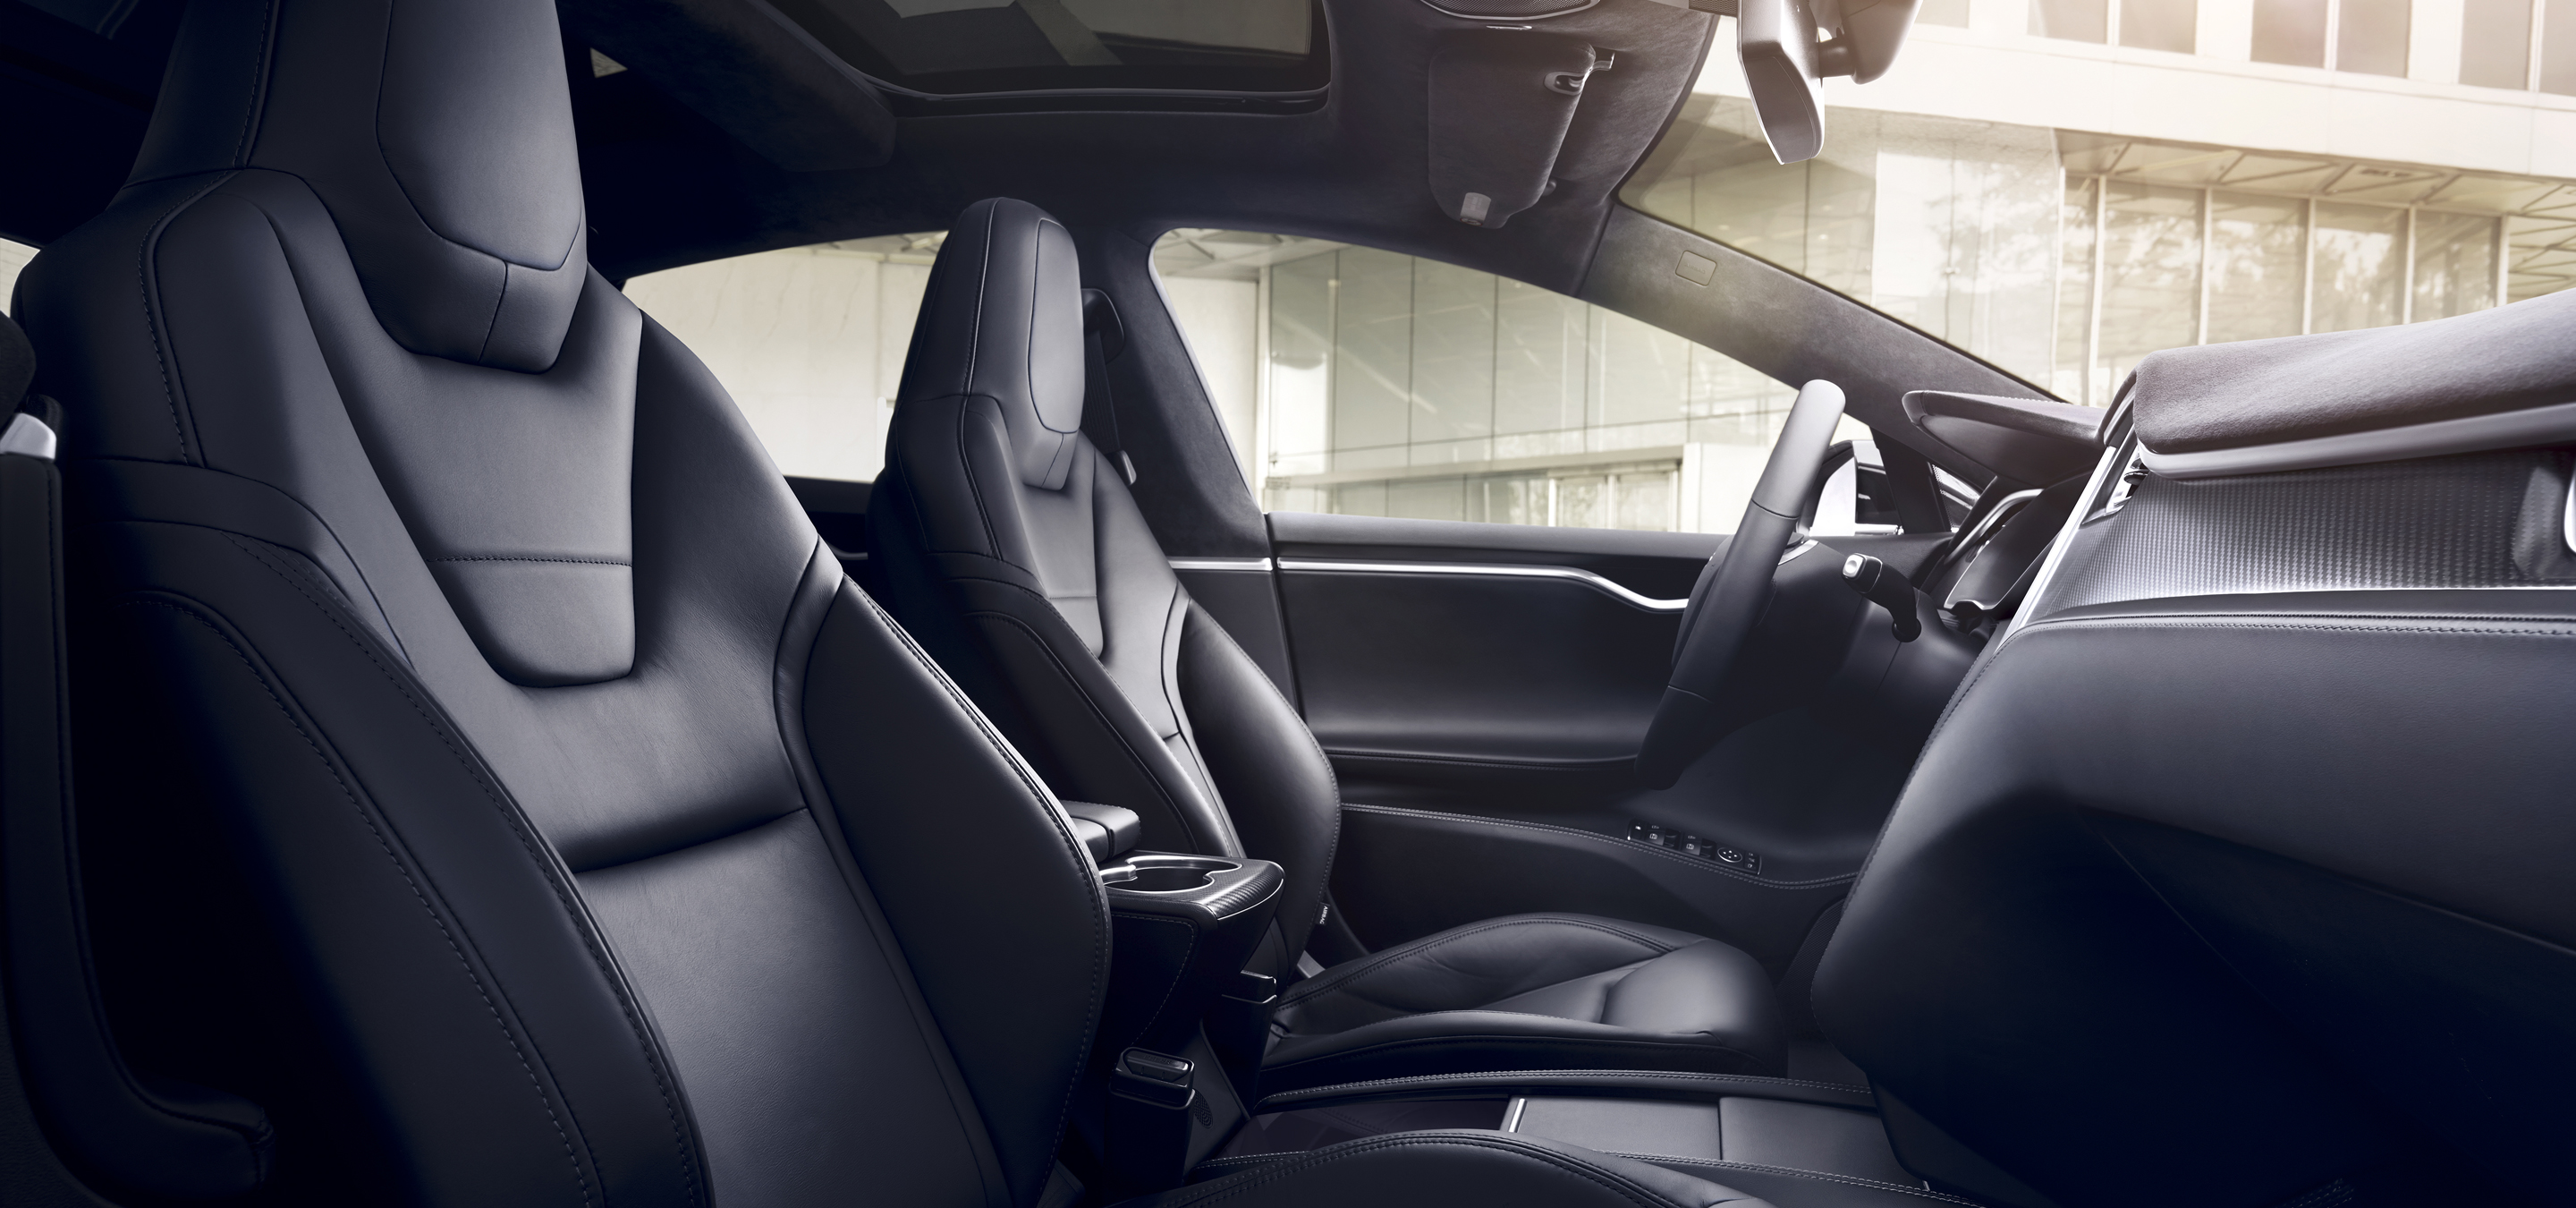 model-s-interior-with-next-generation-leather-seats